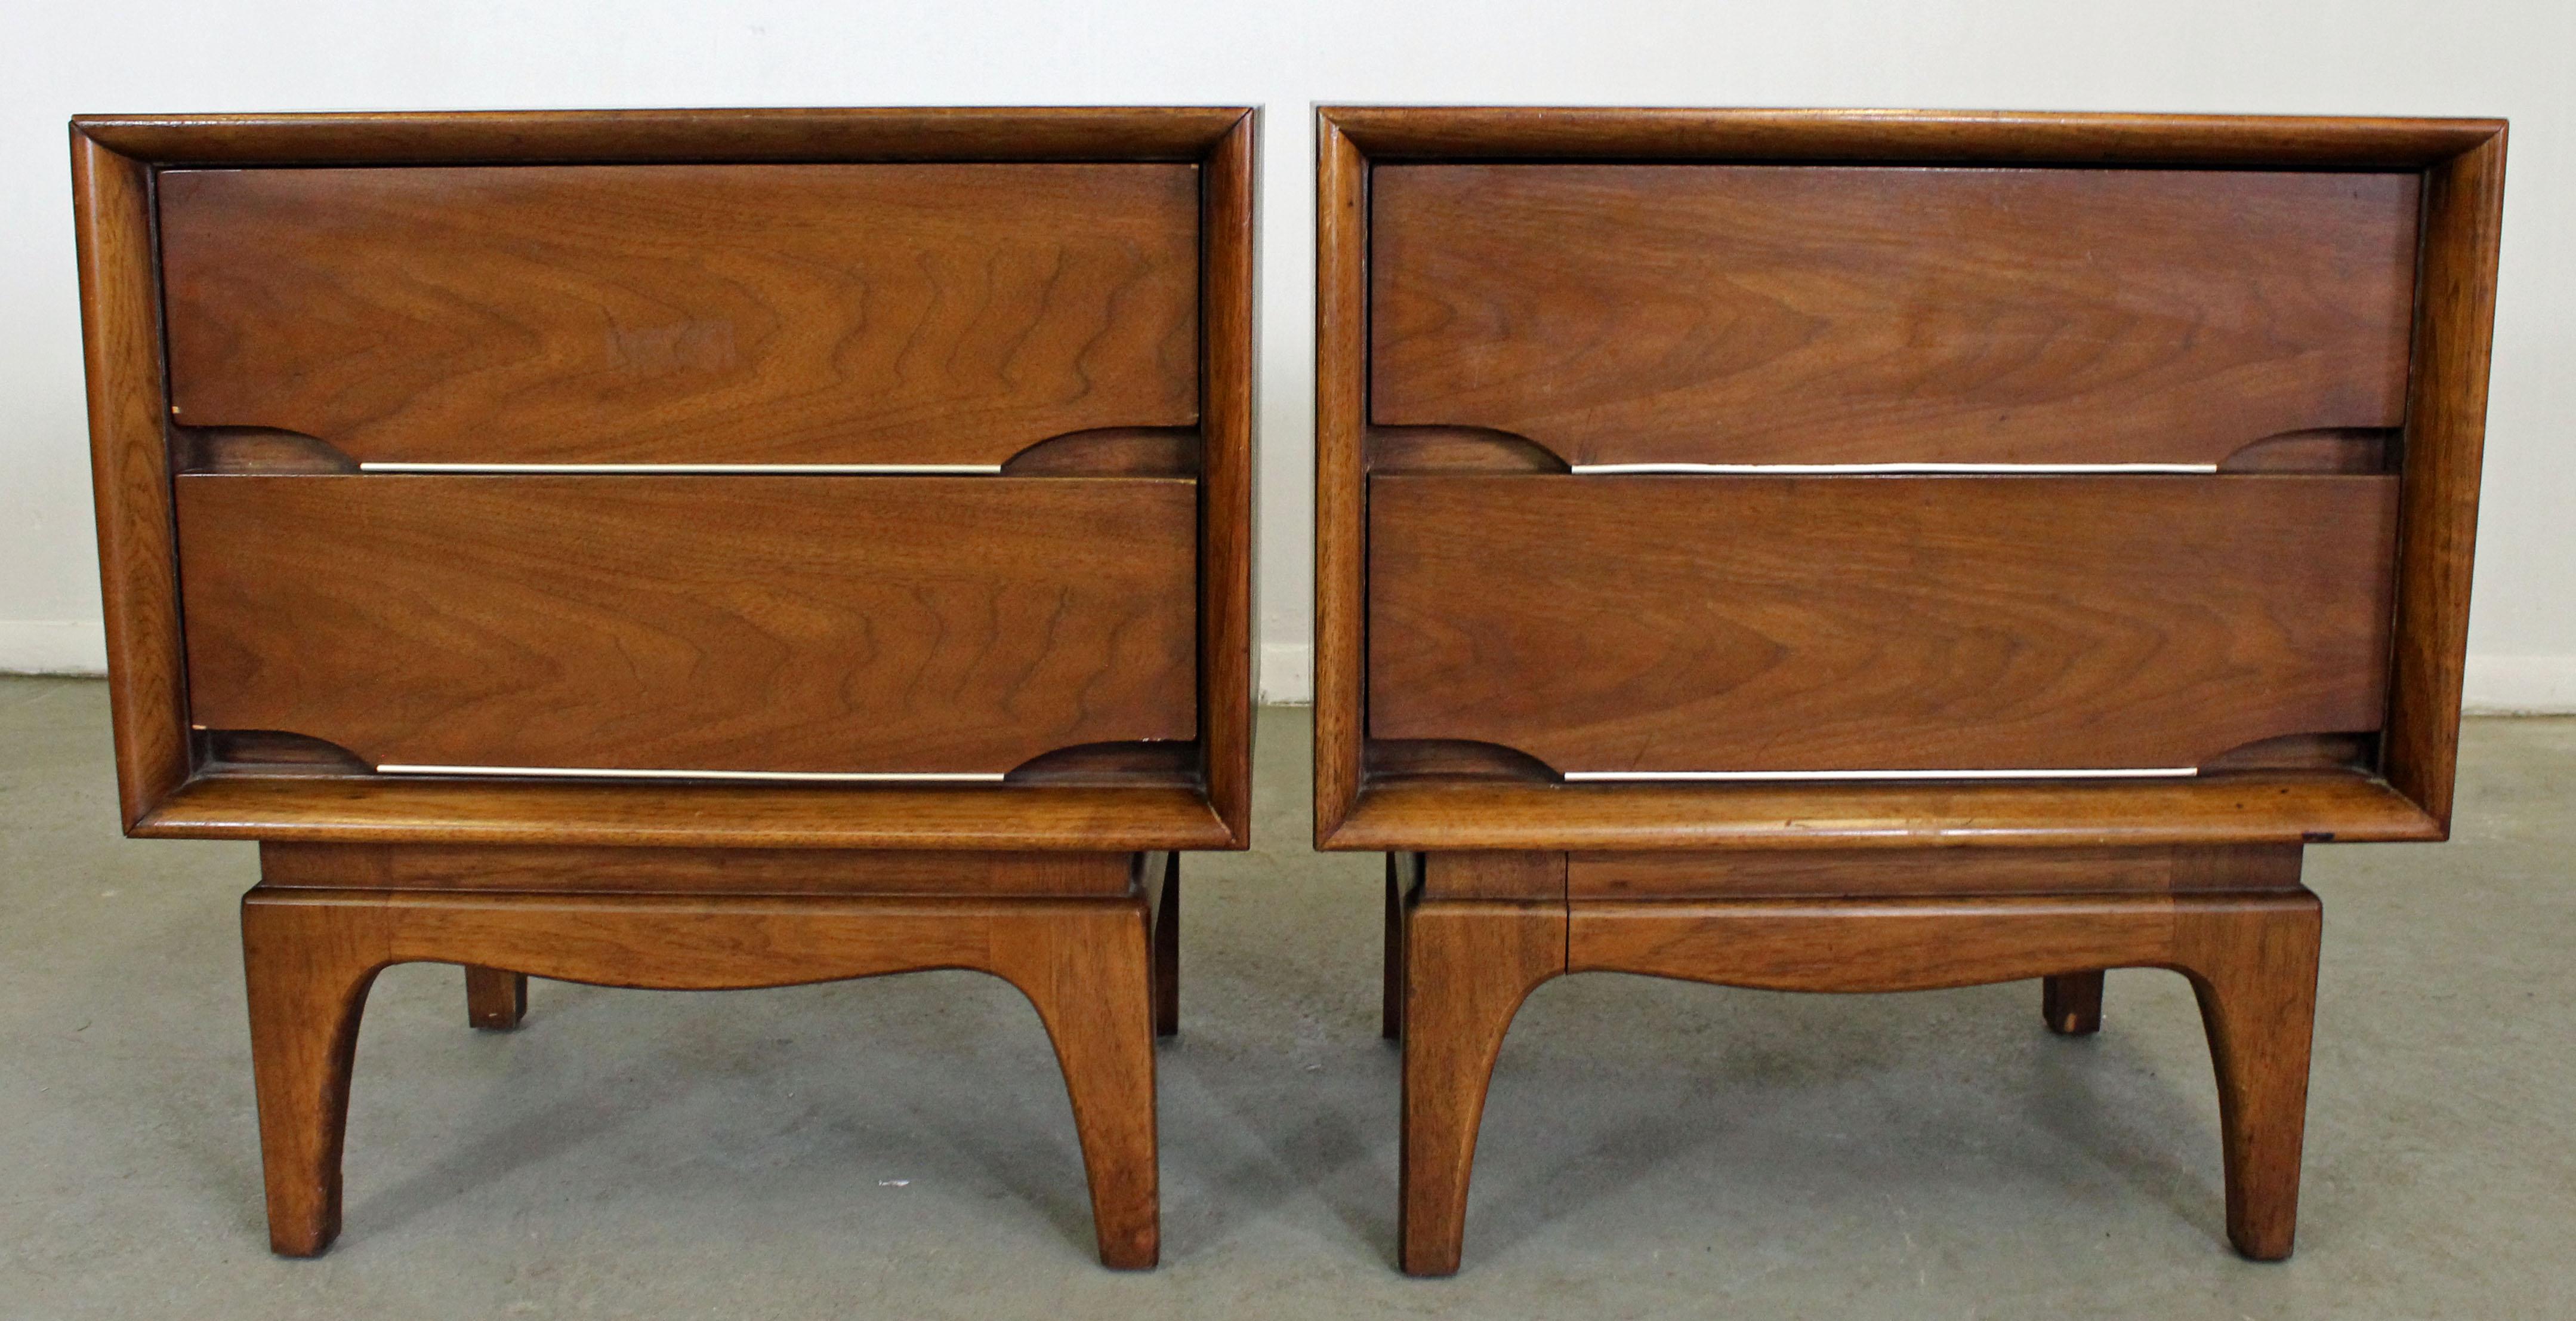 Offered is a pair of walnut nightstands made by Kent Coffey 